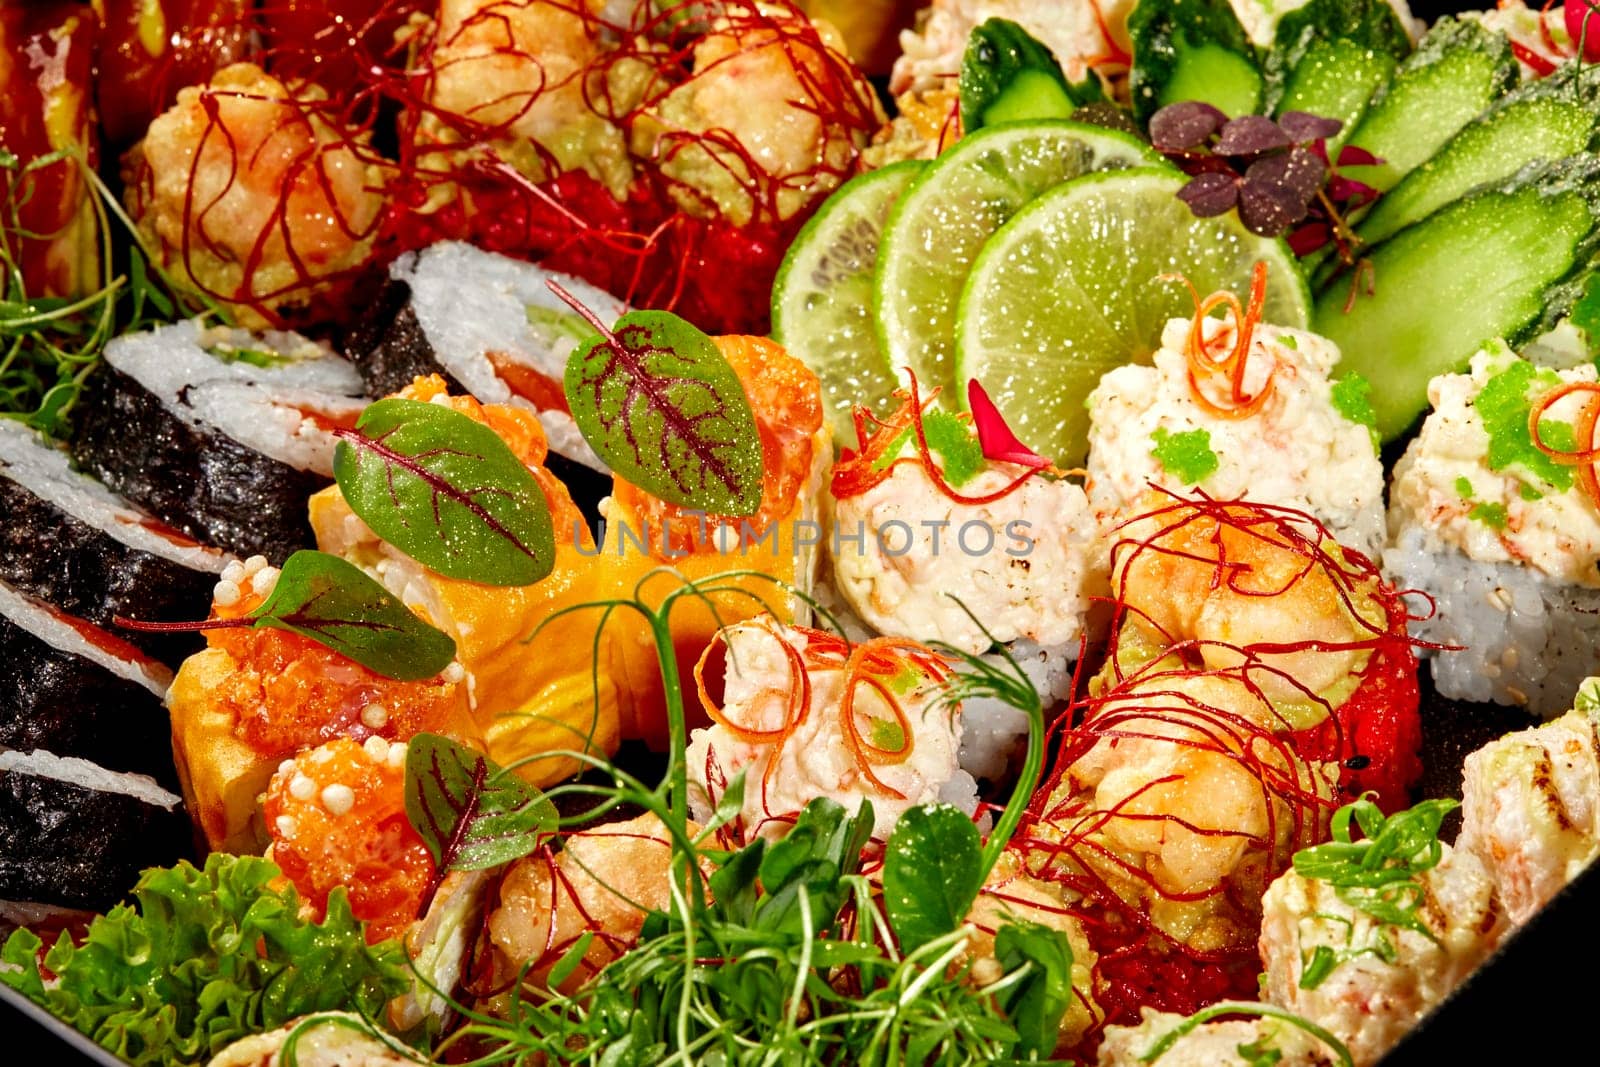 Vibrant sushi rolls platter with various toppings and fillings by nazarovsergey